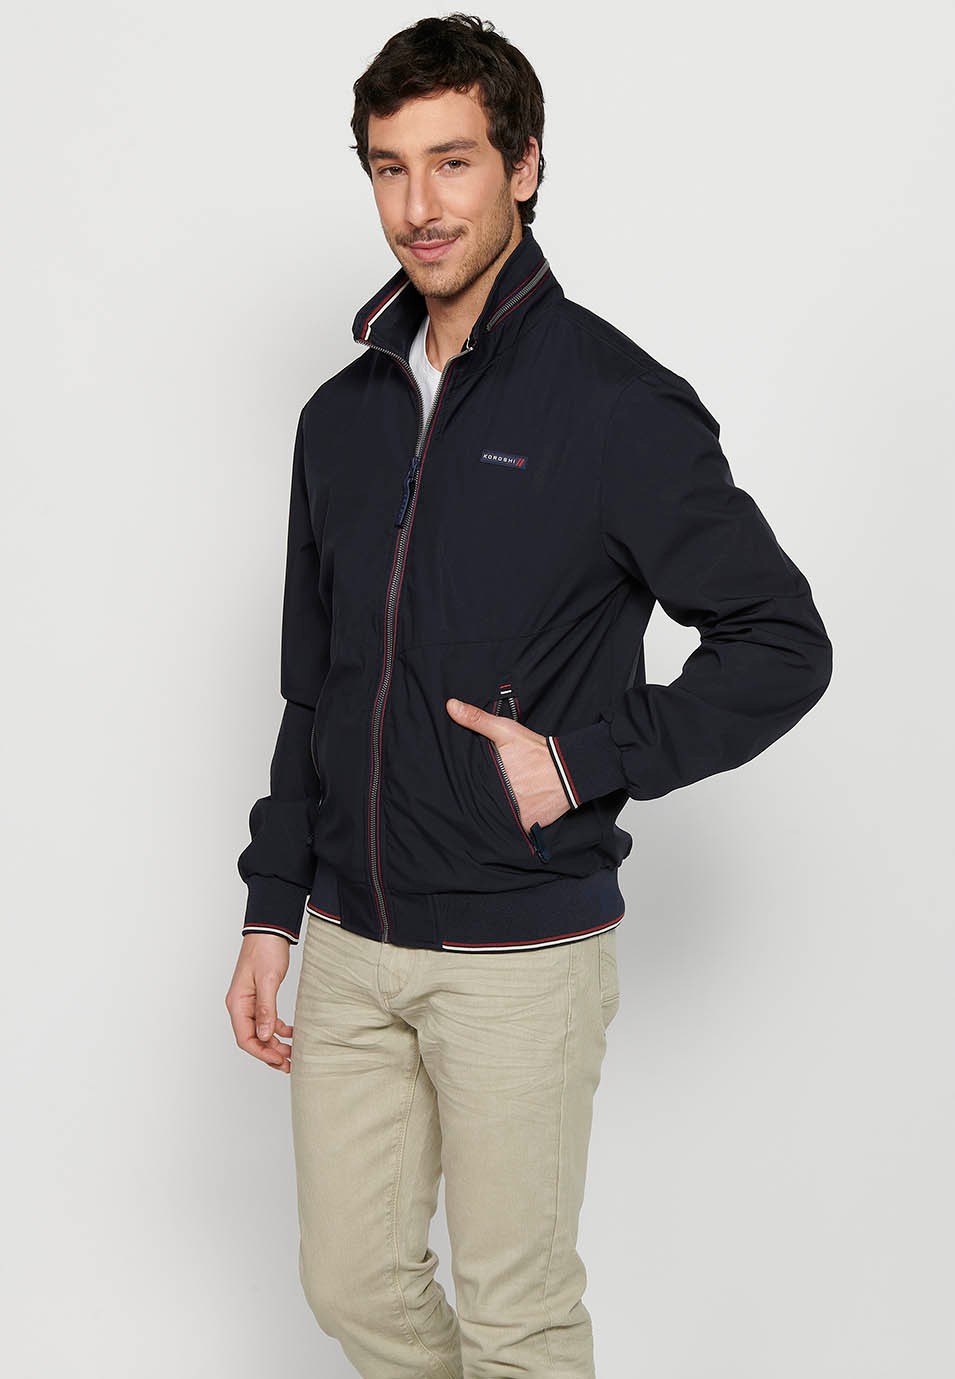 Long-sleeved high-neck jacket with front zipper closure and ribbed finishes with pockets, one inside in Navy for Men 4